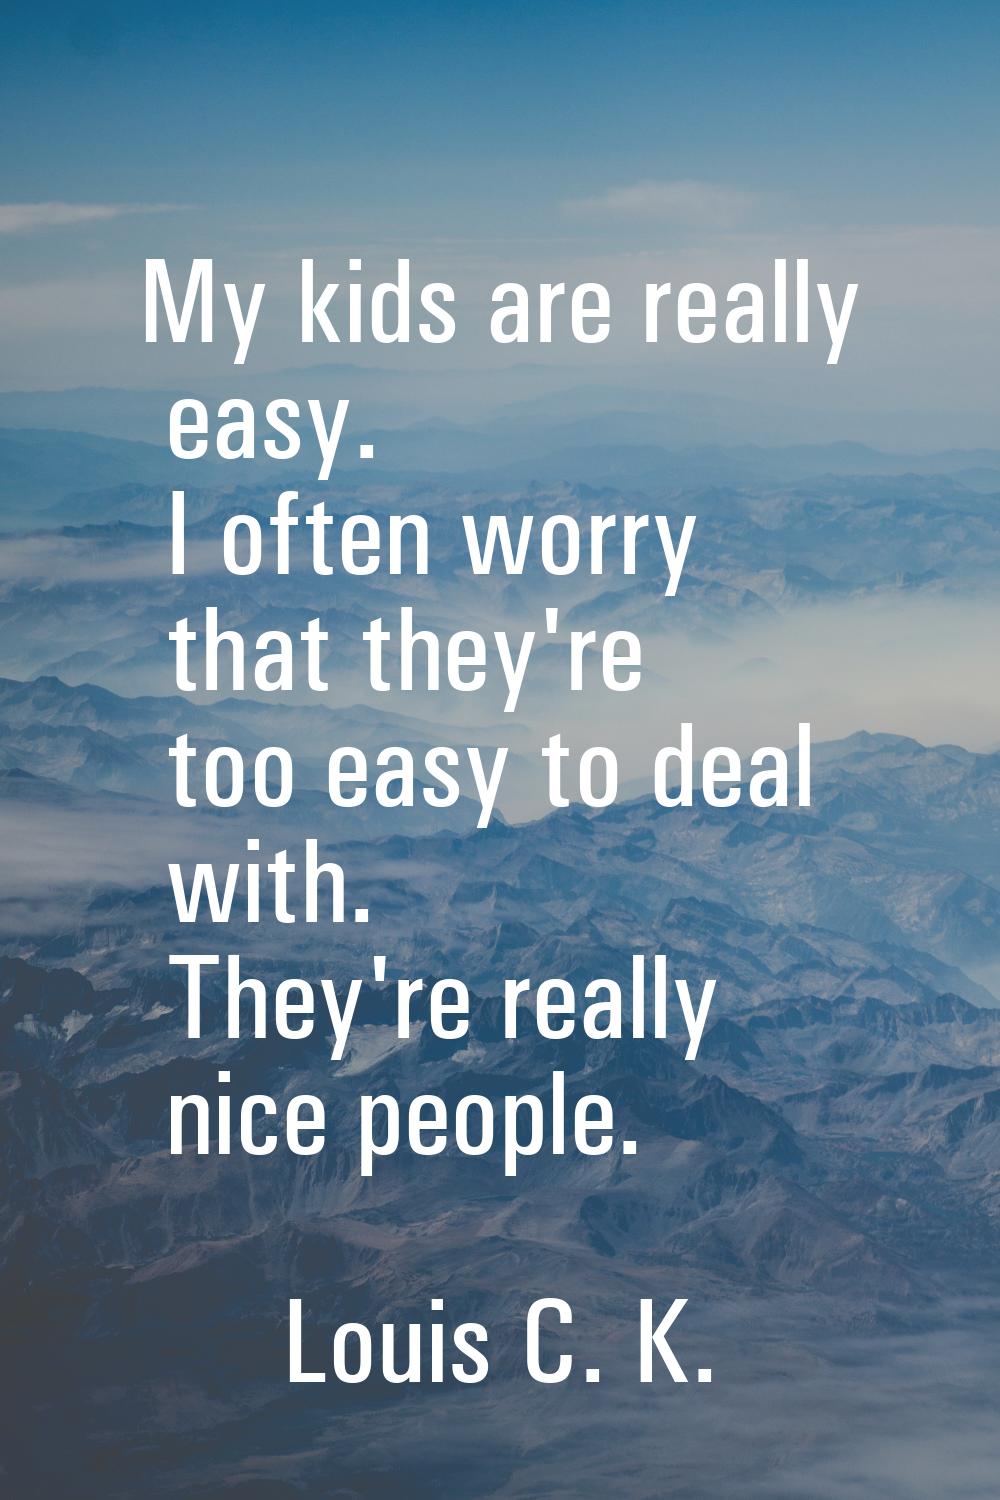 My kids are really easy. I often worry that they're too easy to deal with. They're really nice peop